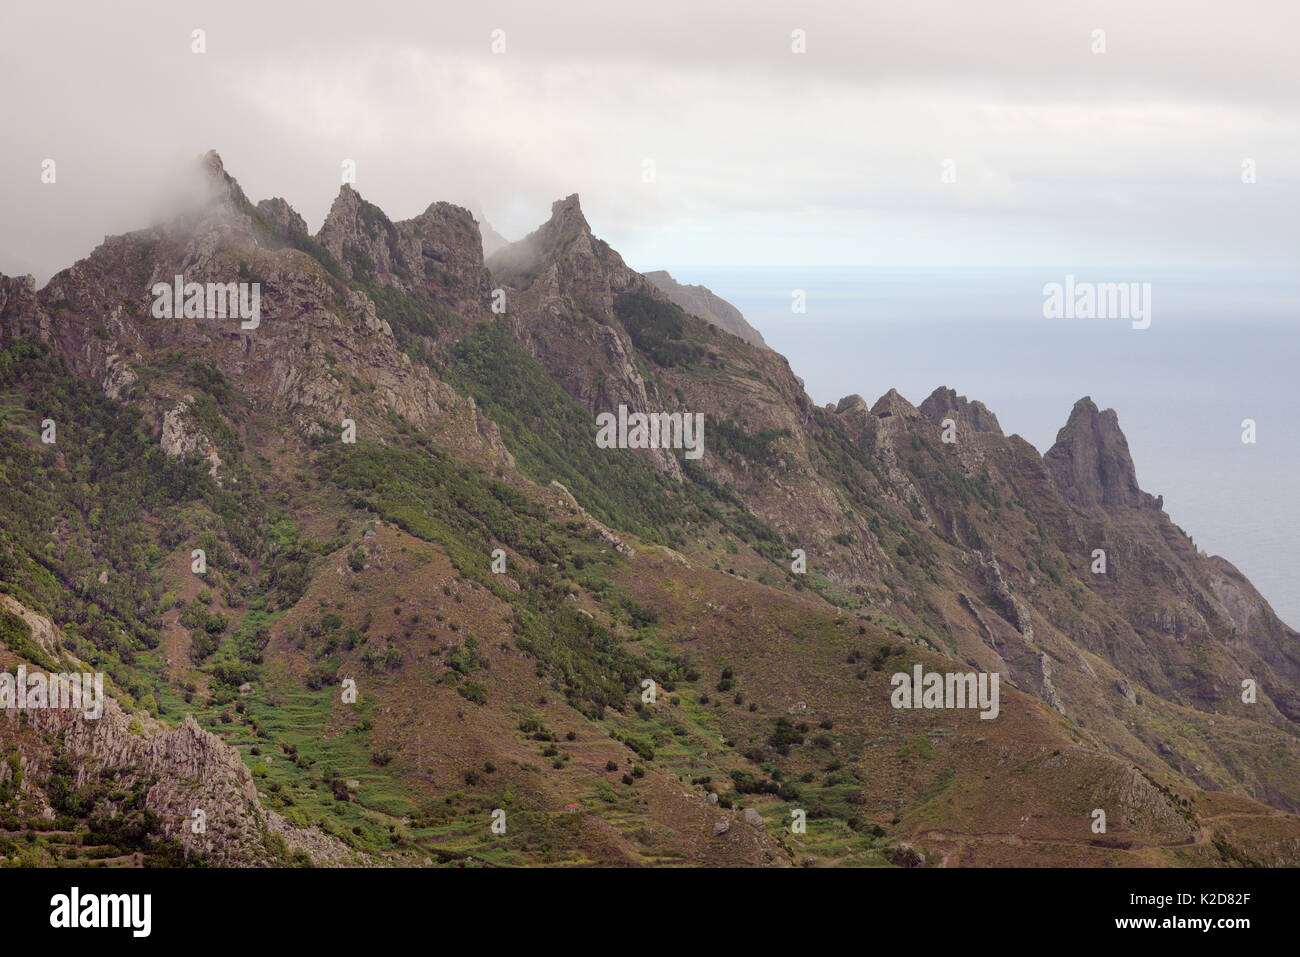 Extinct volcanoes in the cloud-shrouded Anaga mountains flanked by subtropical Laurel forests above Taganana village, Anaga Rural Park,Tenerife, May. Stock Photo